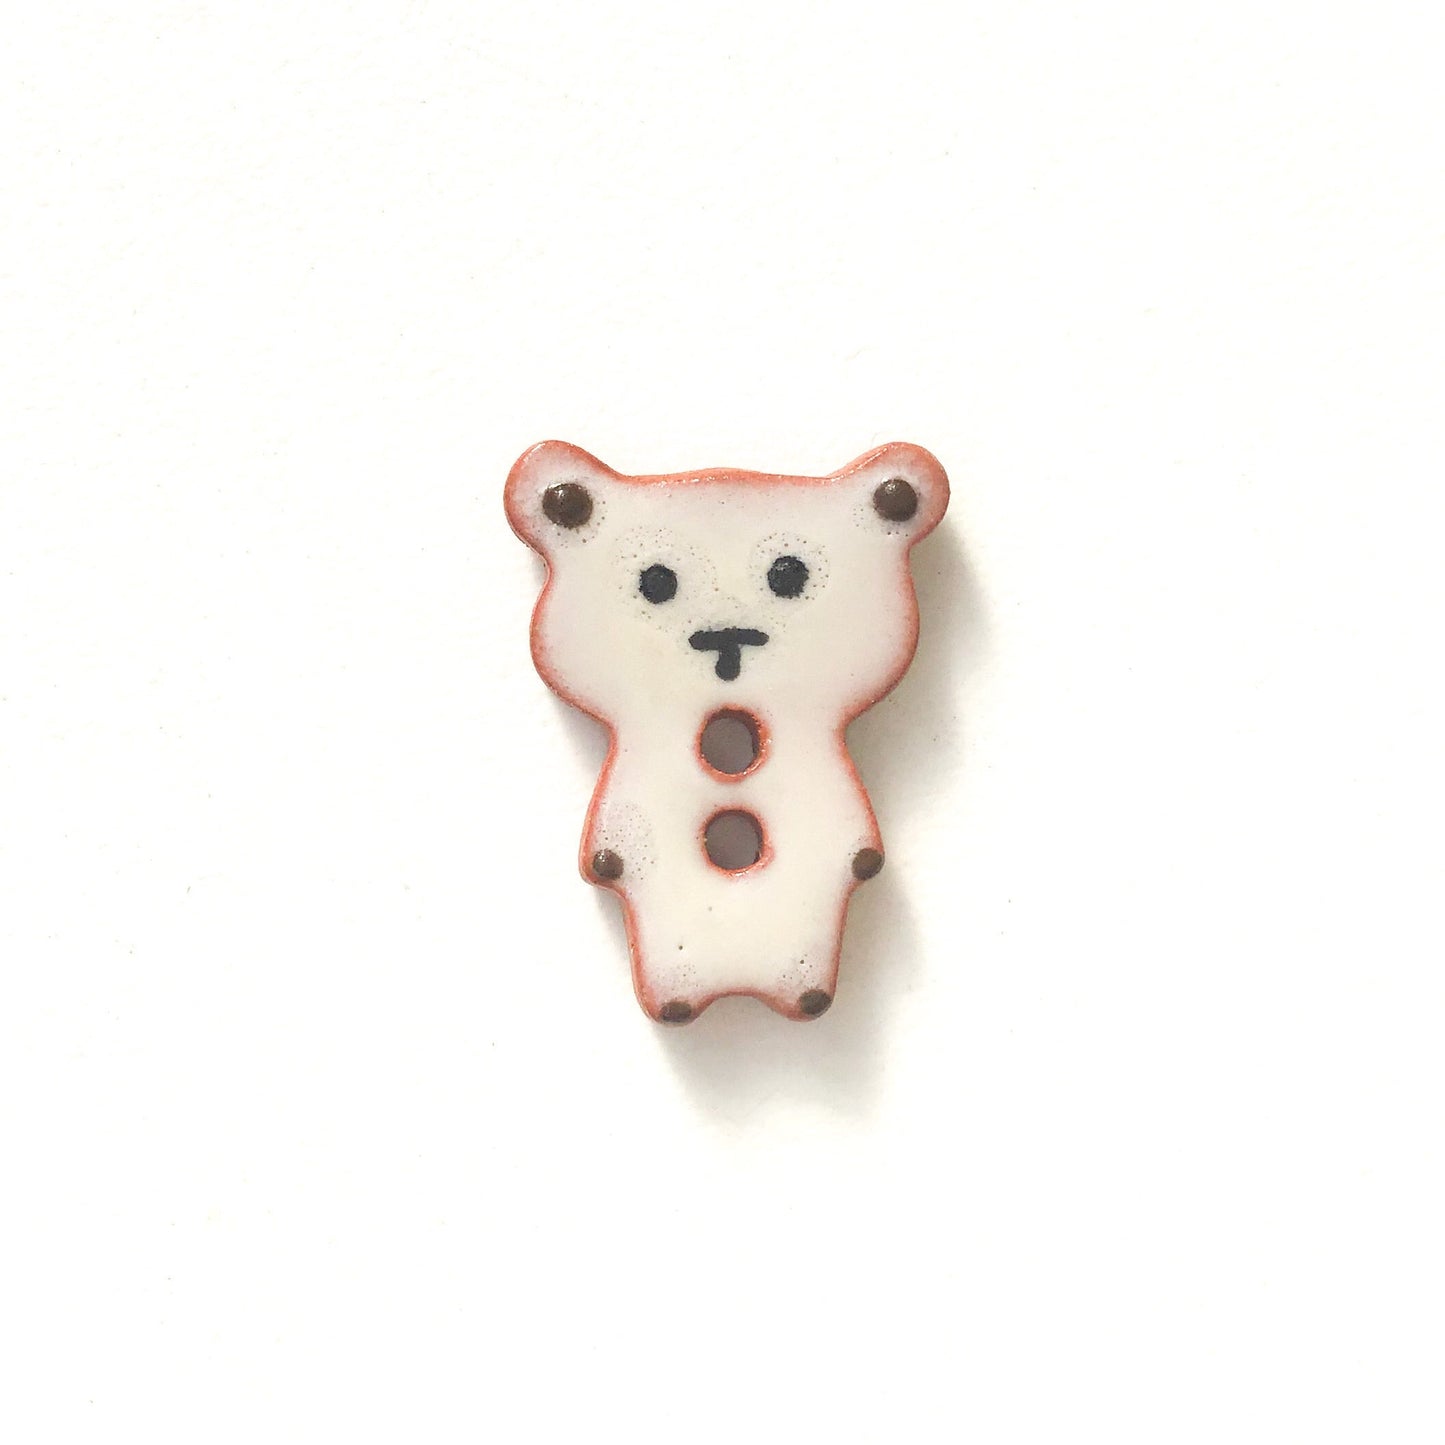 (Wholesale Accounts Only) 5/8" x 3/4" Teddy Bear - flat - red clay